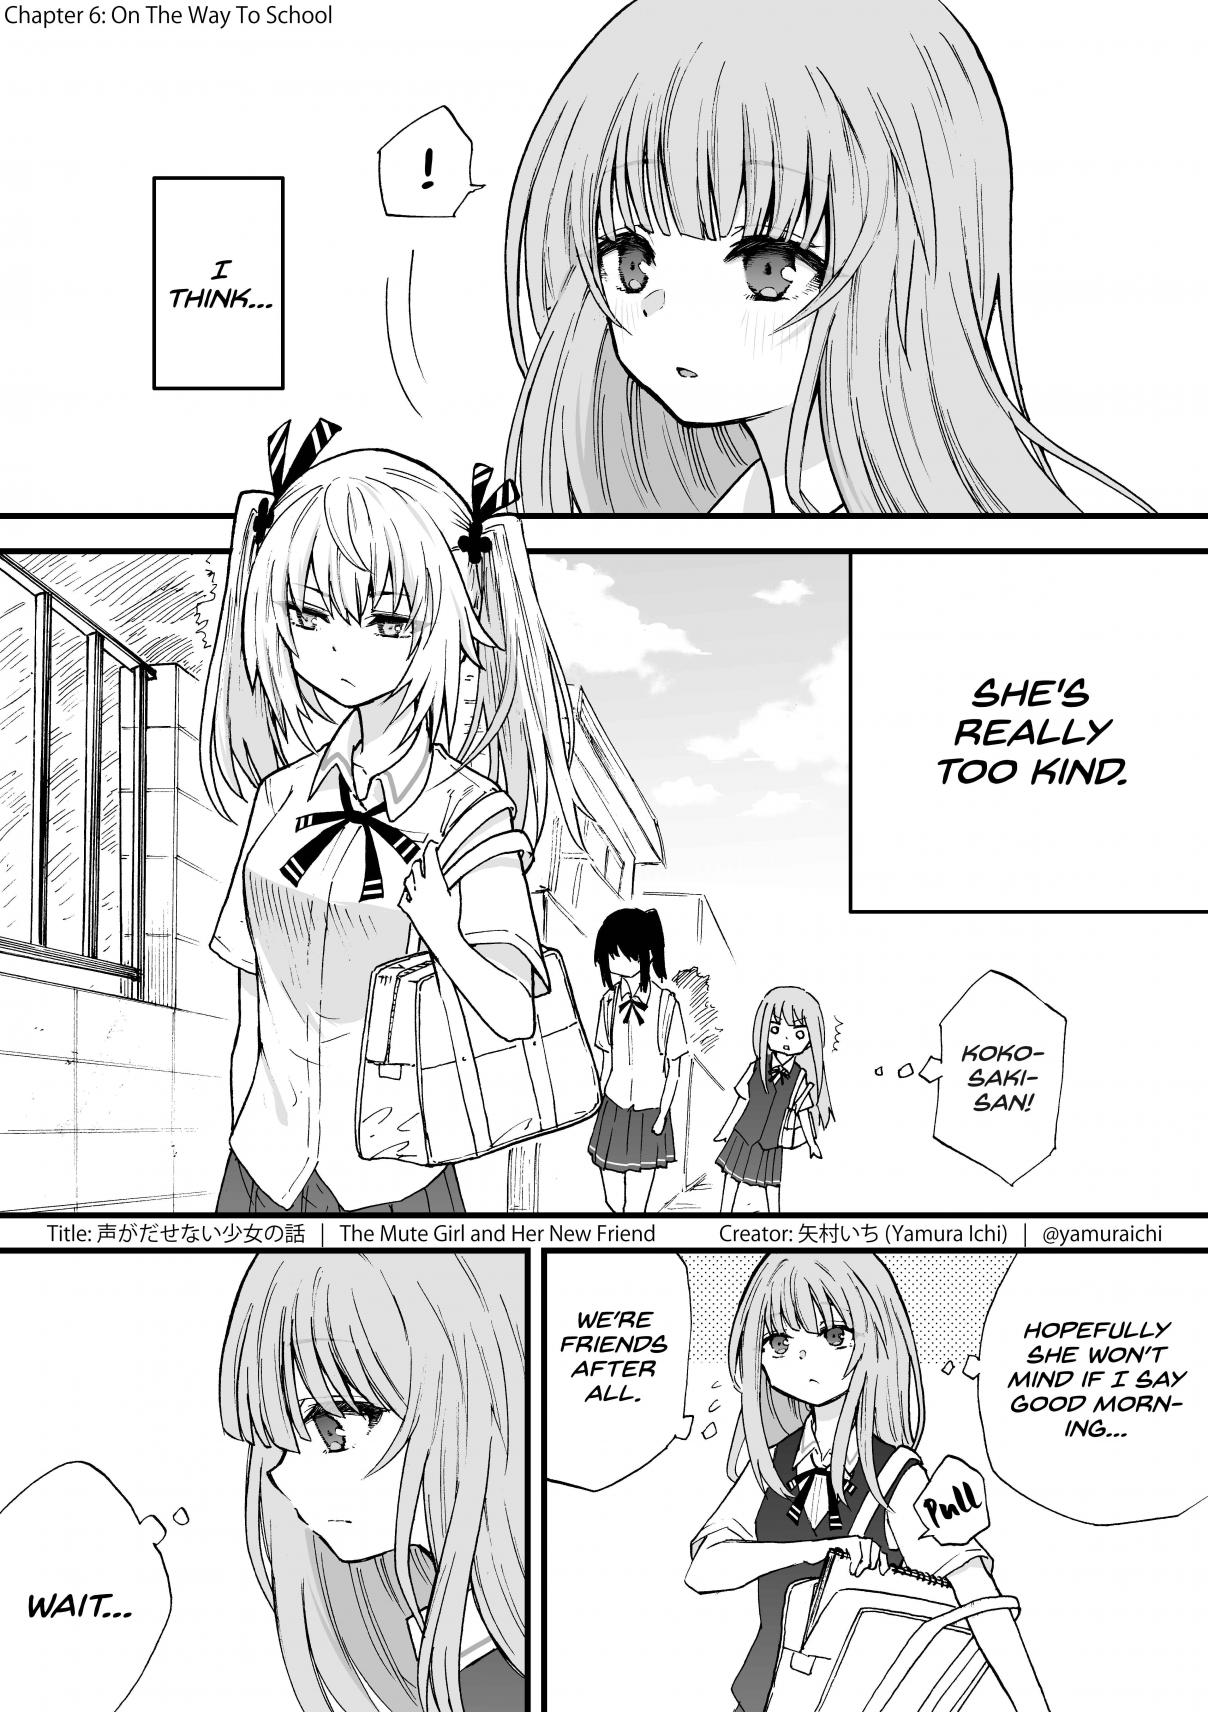 The Mute Girl and Her New Friend (Webcomic) Ch. 6 On The Way To School